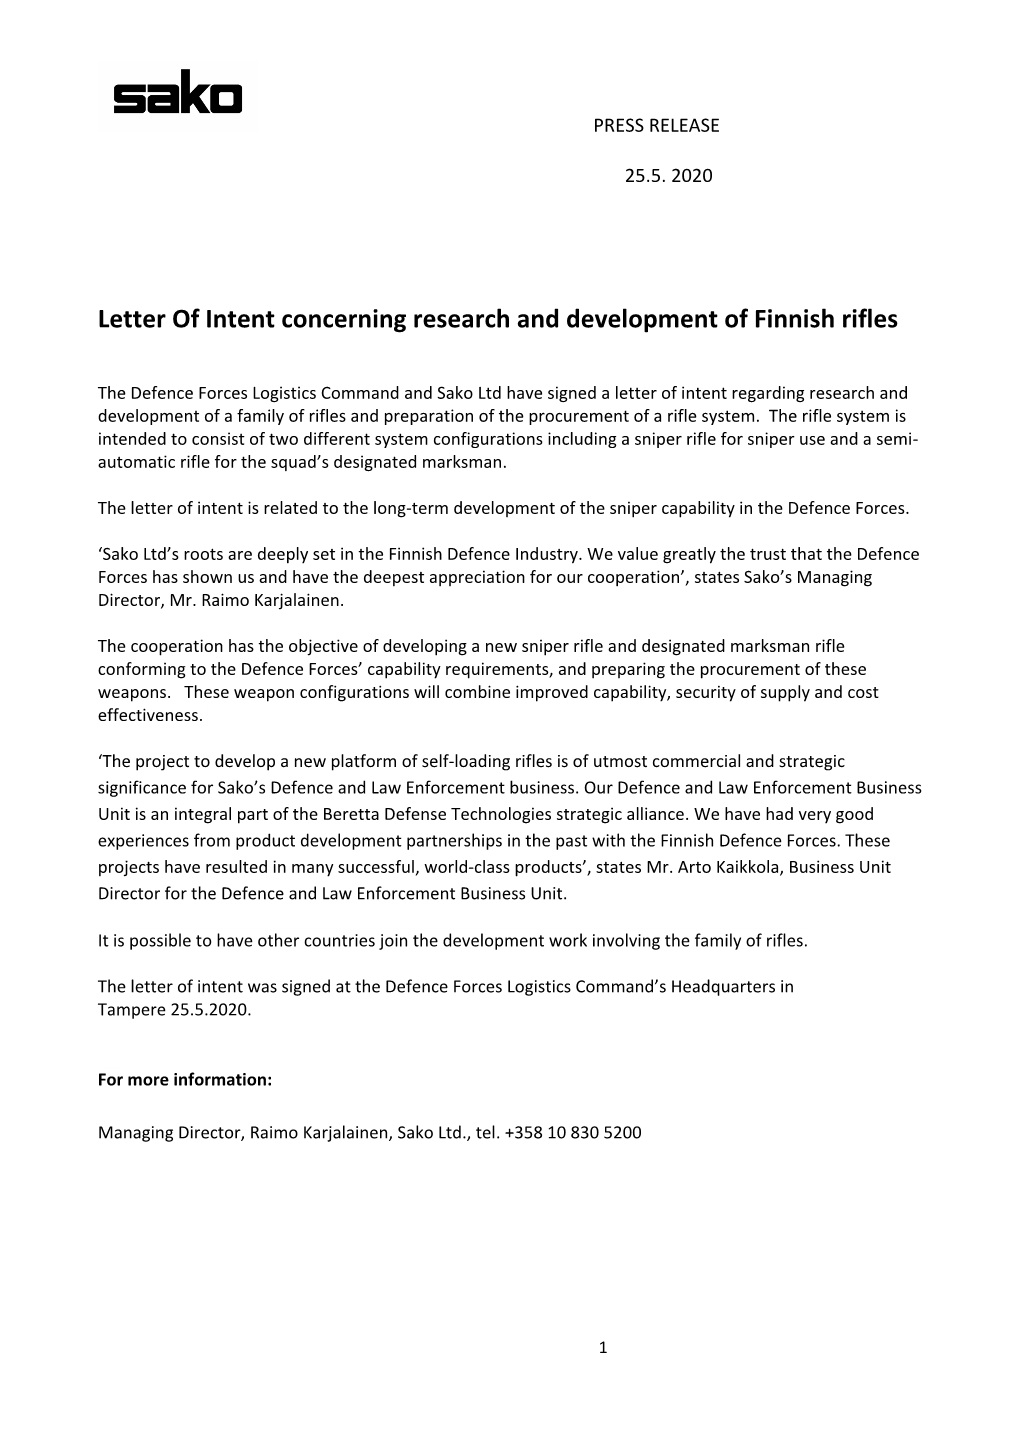 Letter of Intent Concerning Research and Development of Finnish Rifles